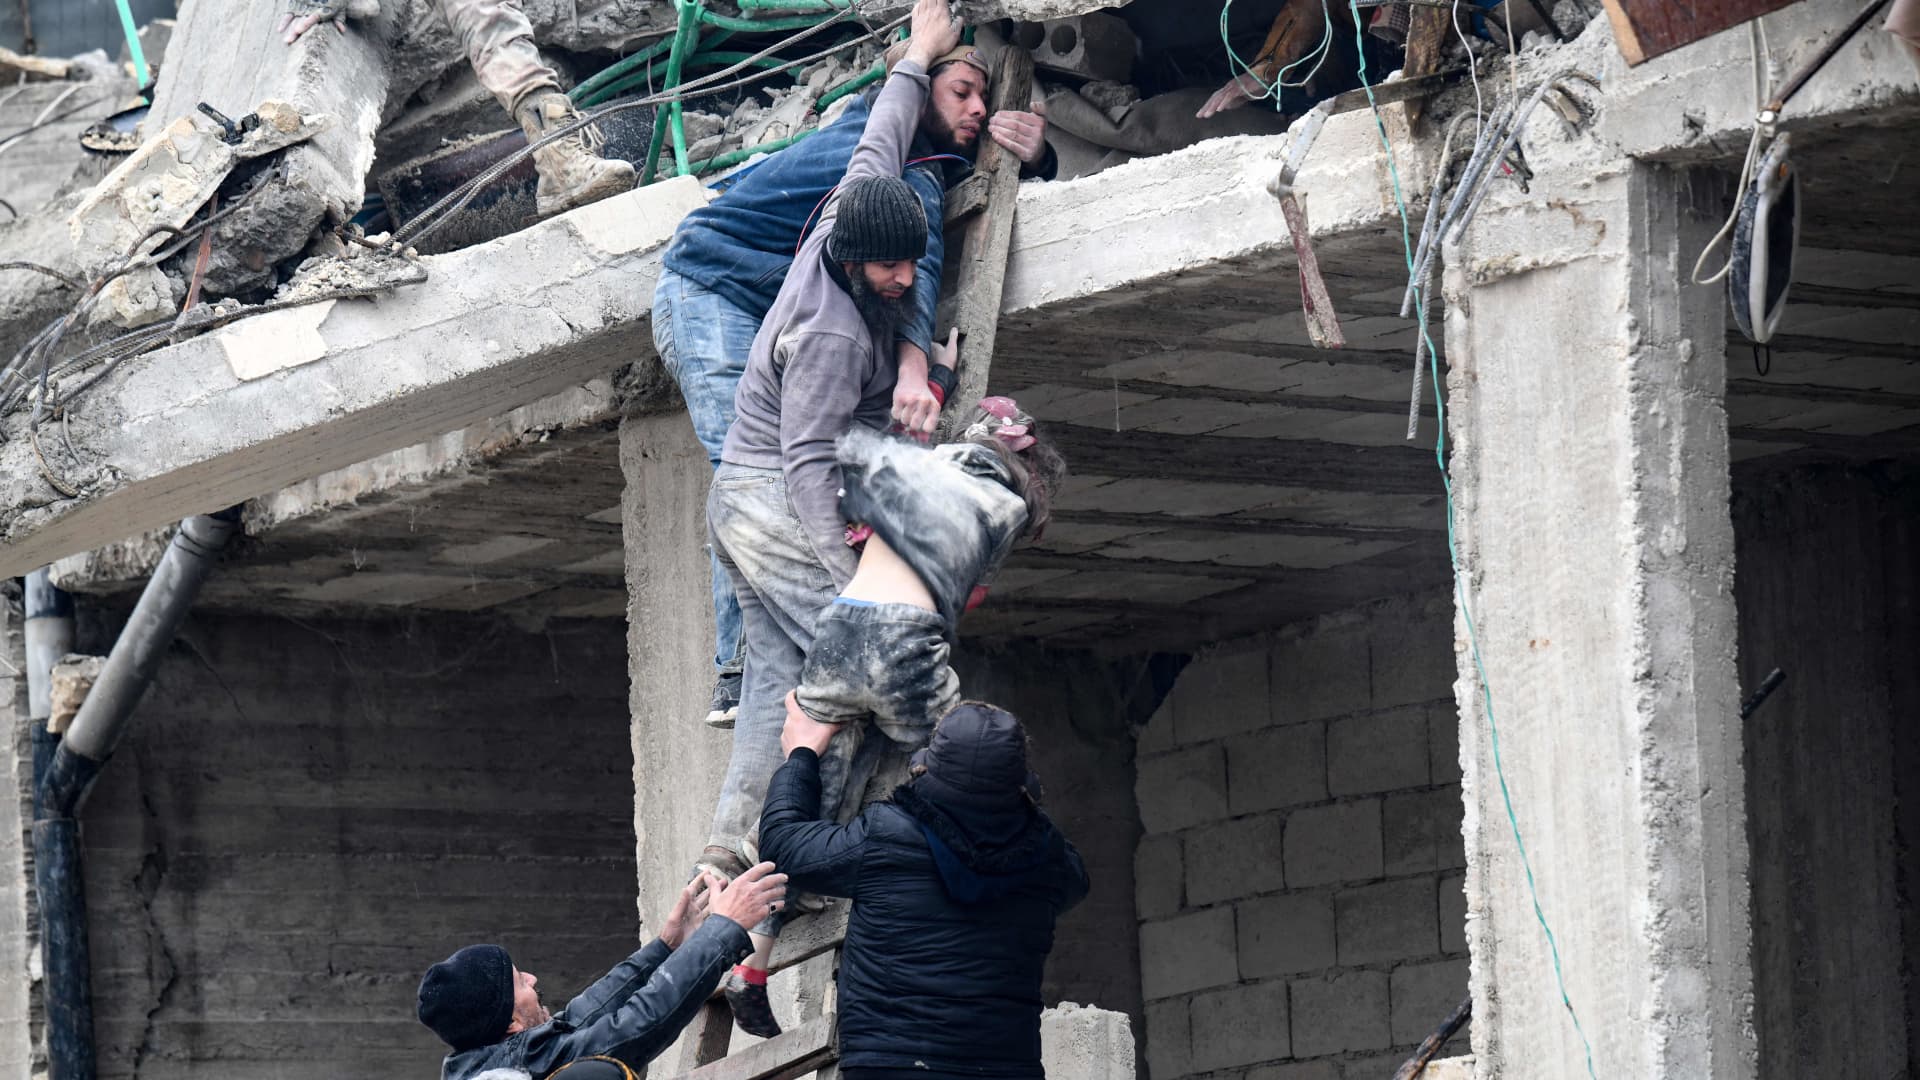 Residents retrieve an injured girl from the rubble of a collapsed building following an earthquake in the town of Jandaris, in the countryside of Syria's northwestern city of Afrin in the rebel-held part of Aleppo province, on February 6, 2023.